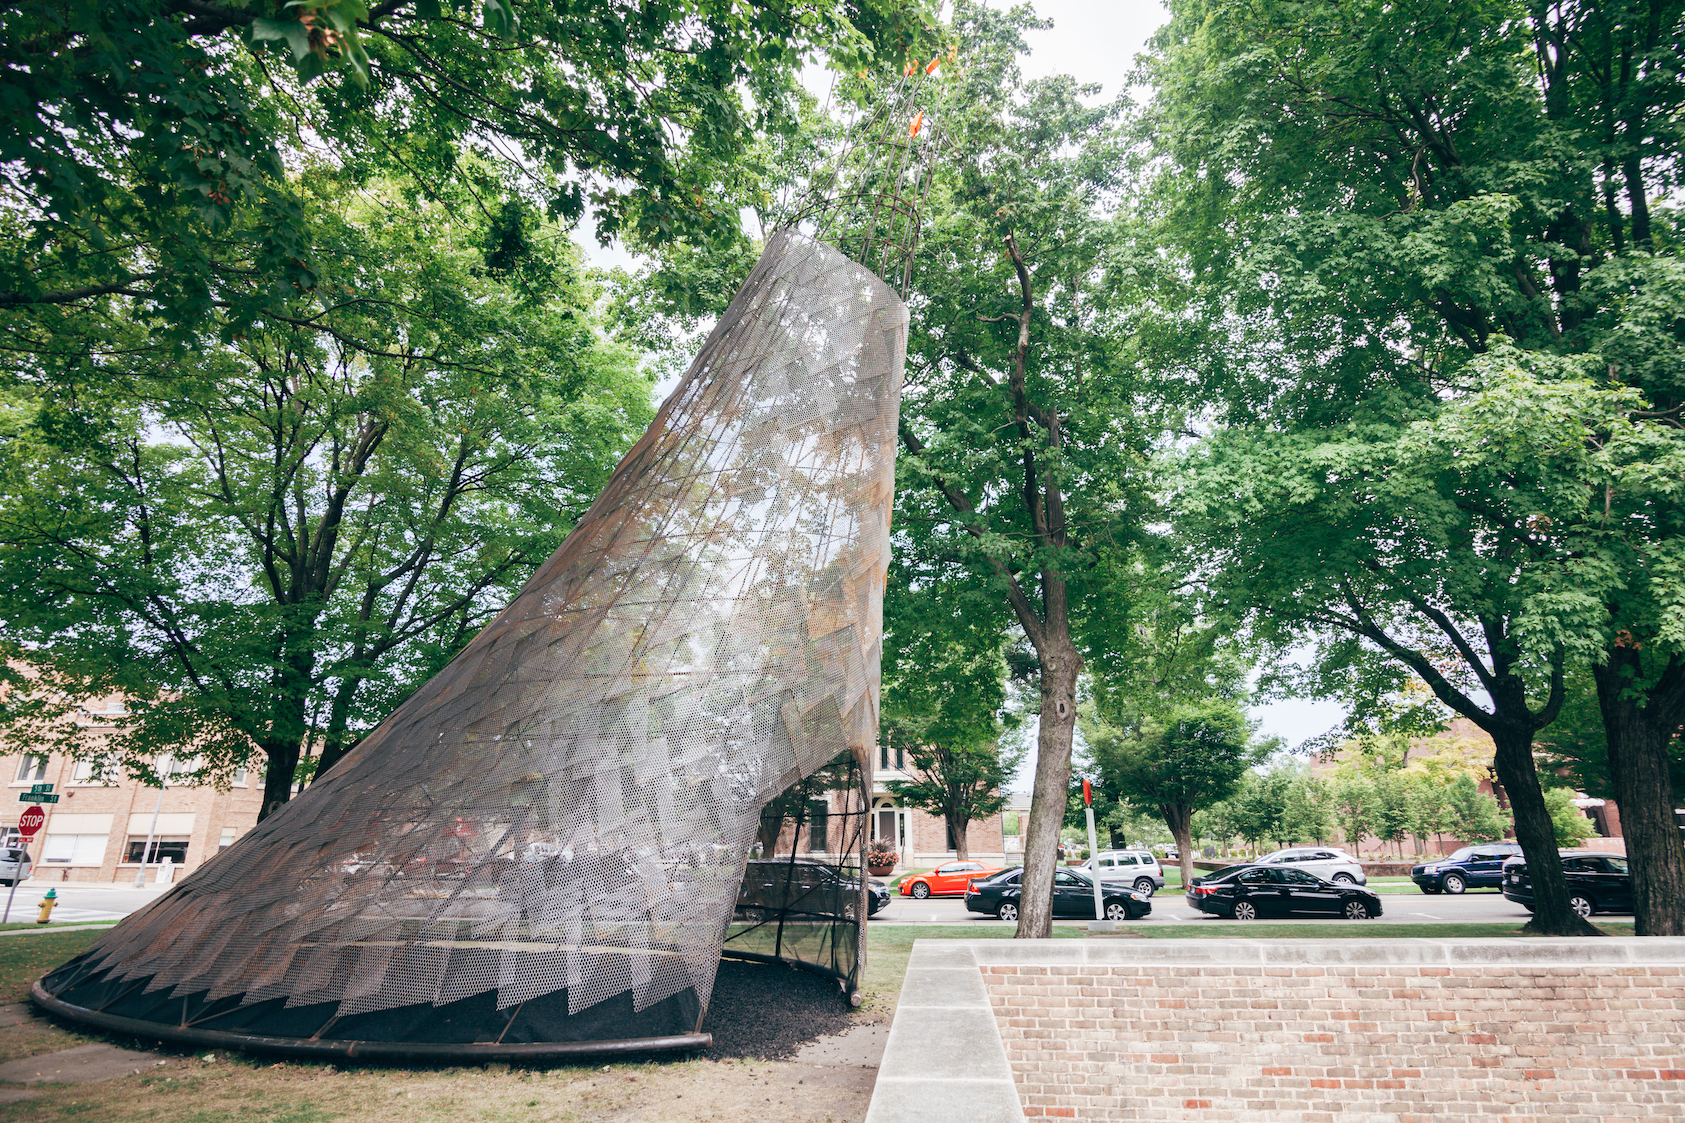 Large metal triangular-shaped hut sculpture in wooded park